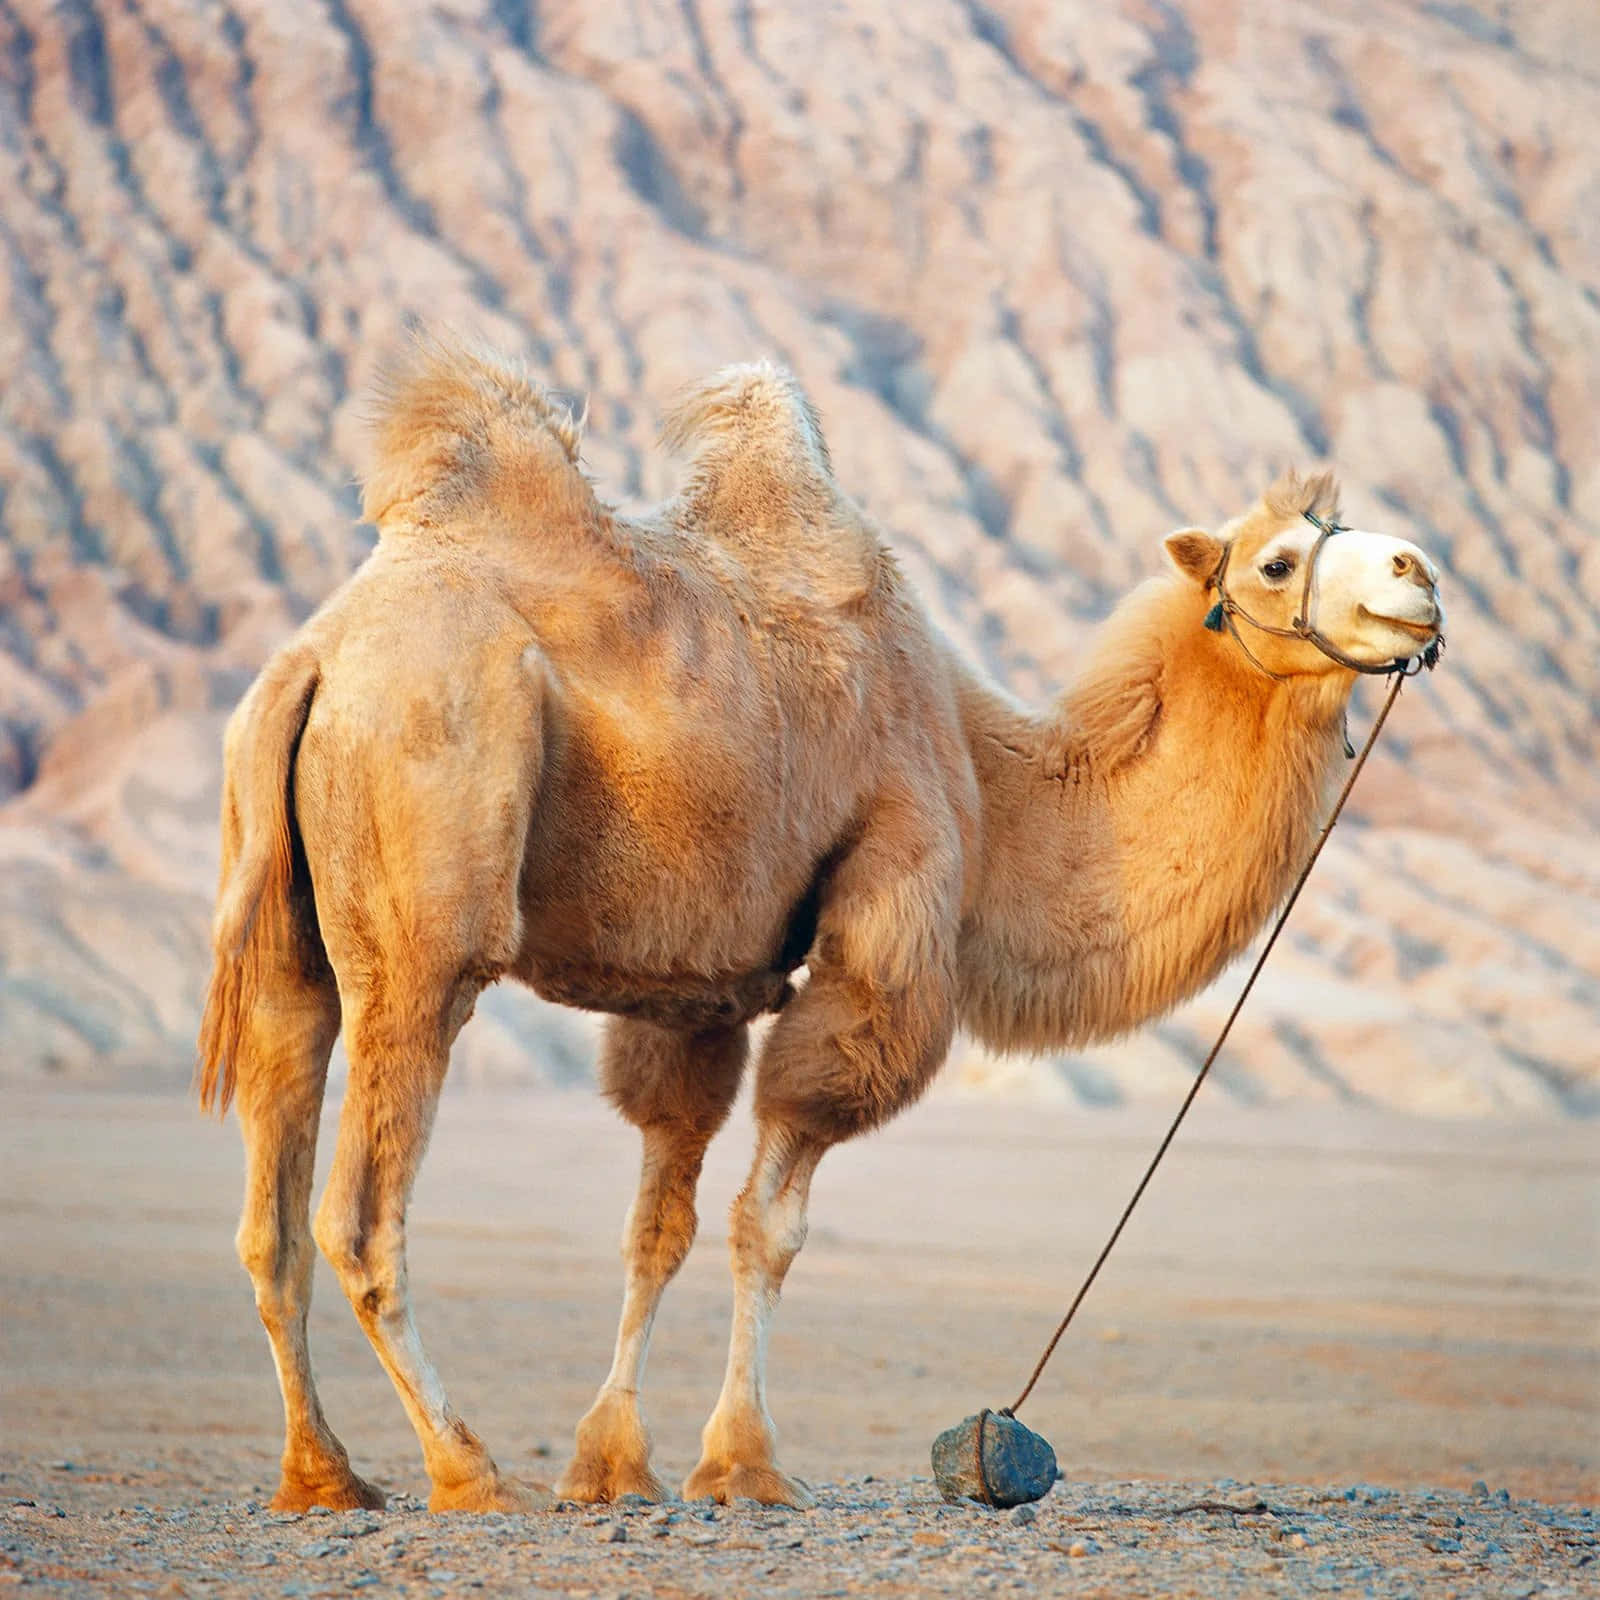 Take a leisurely journey through the desert and admire the serene beauty of the camel